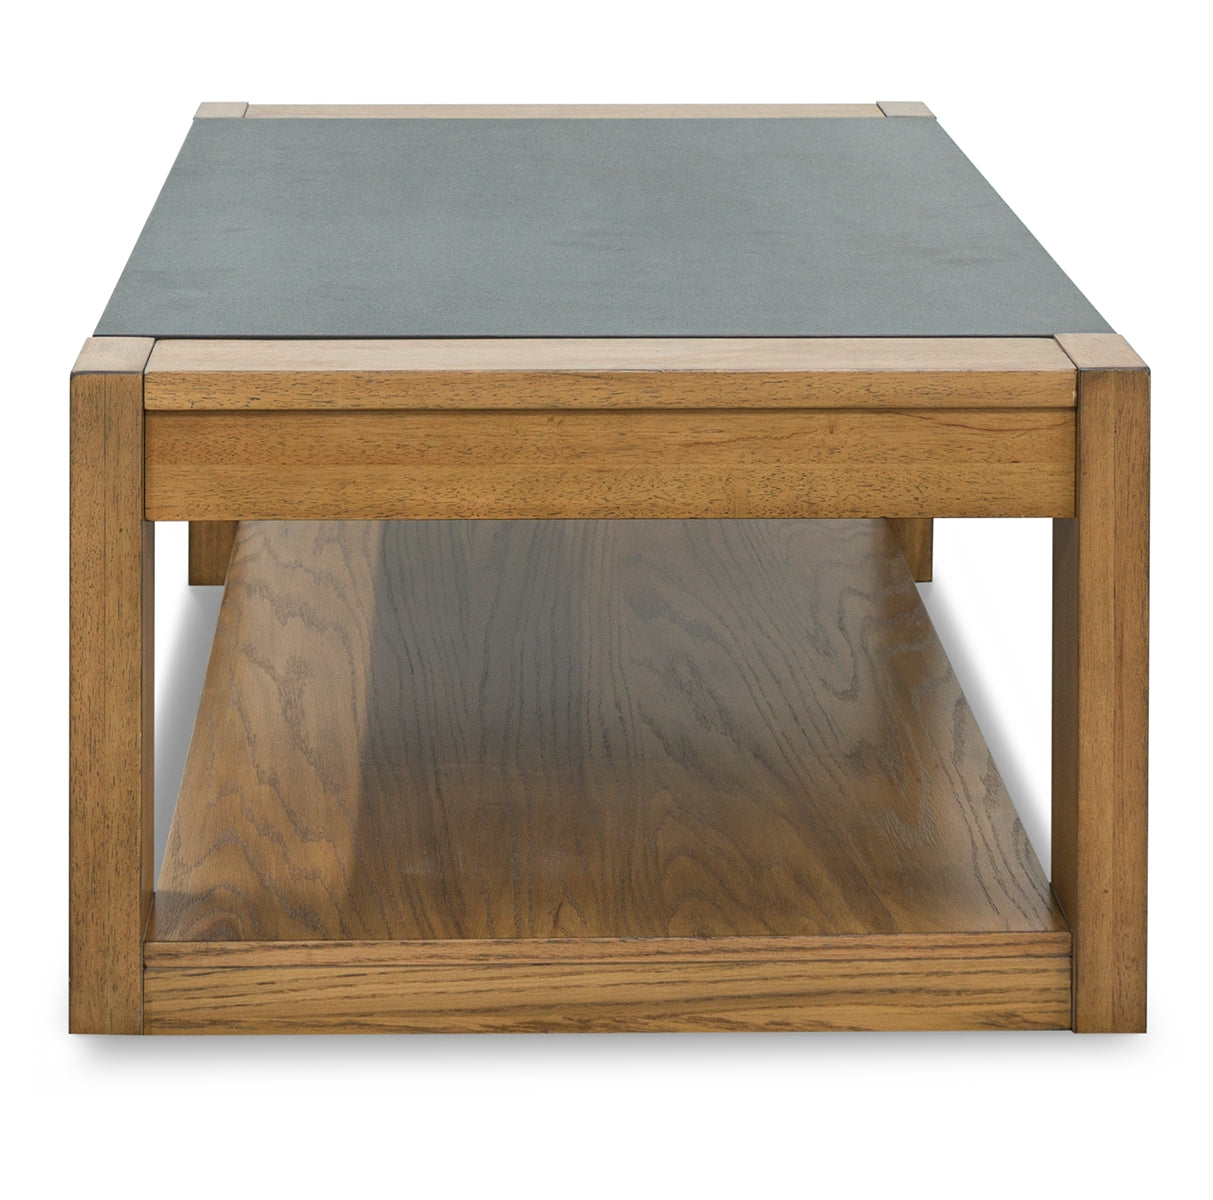 Quentina Lift Top Coffee Table